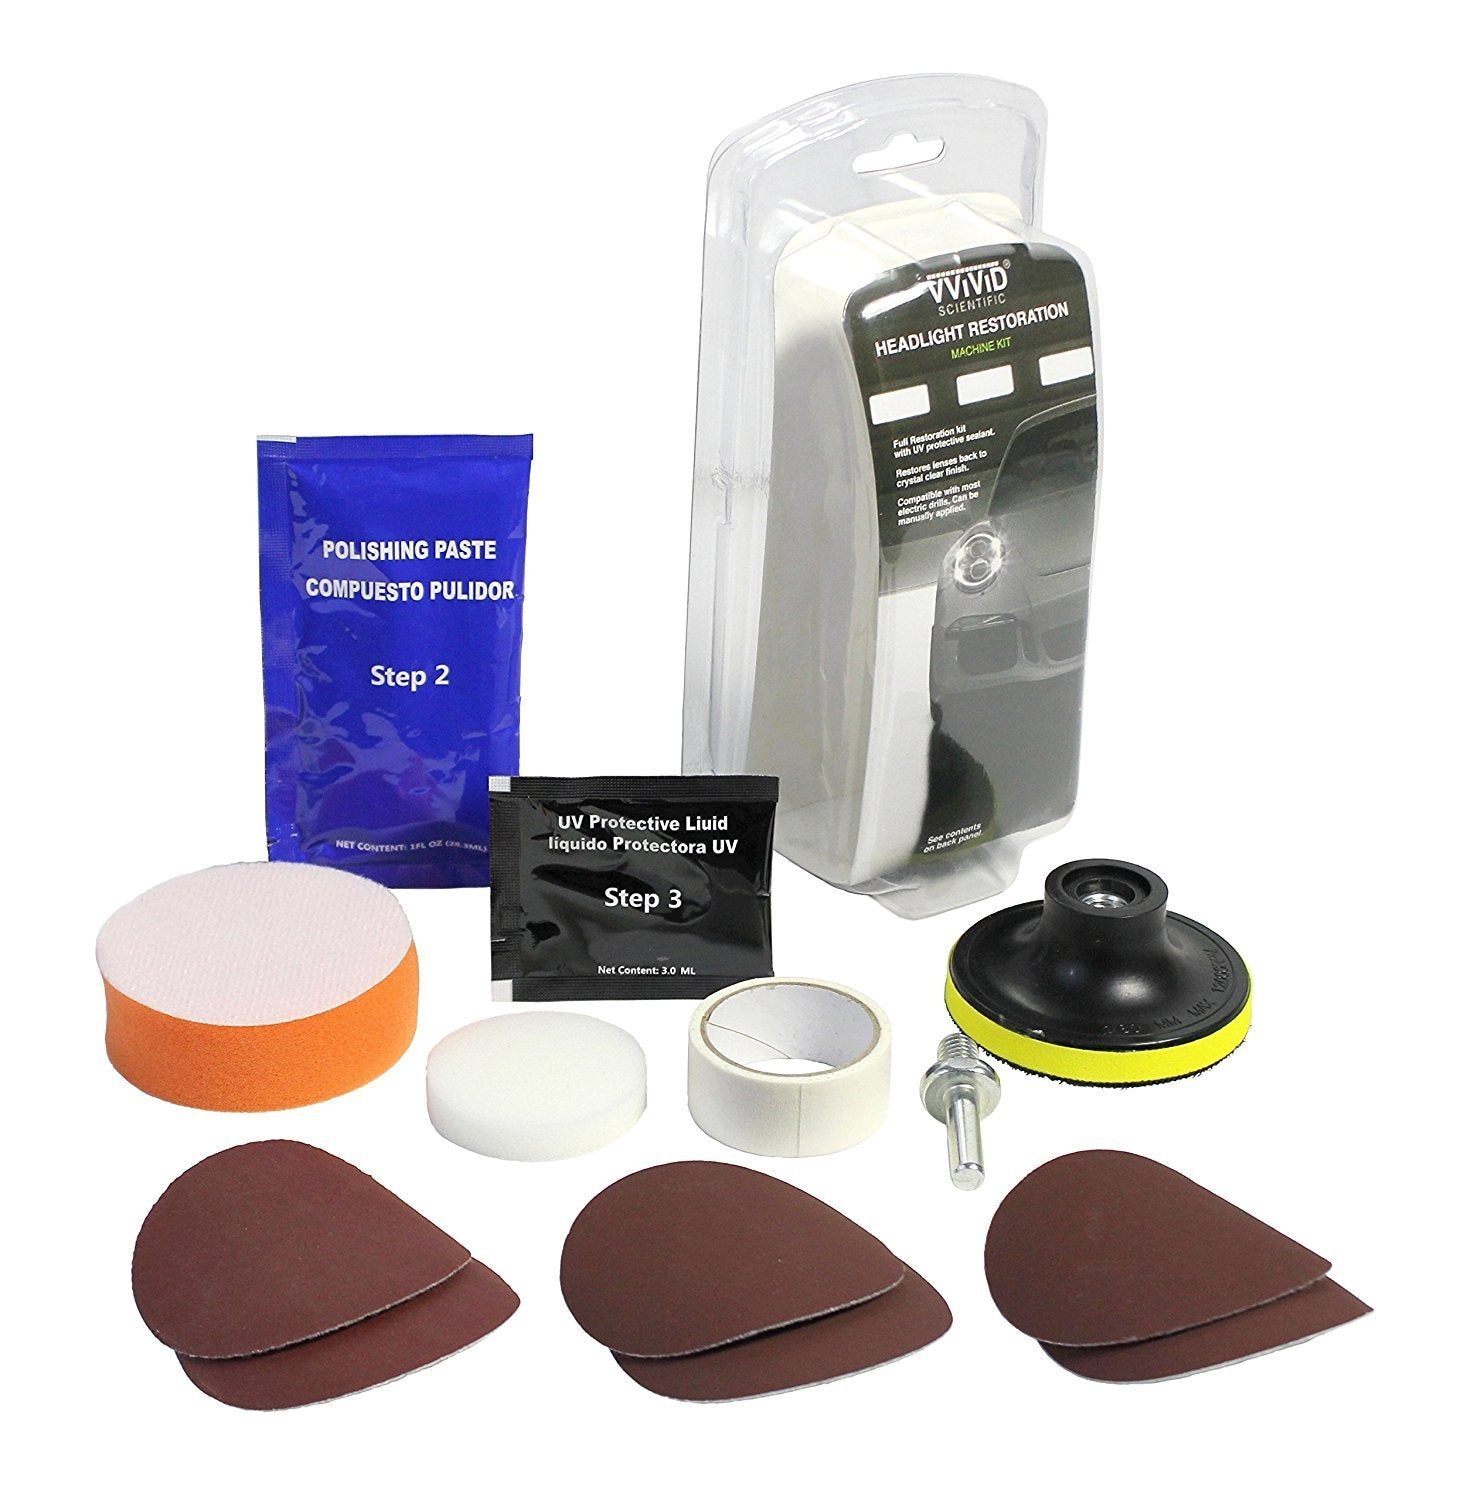 Complete Series Rubber Eraser Wheel - Graphics & Adhesive removal (MCF)